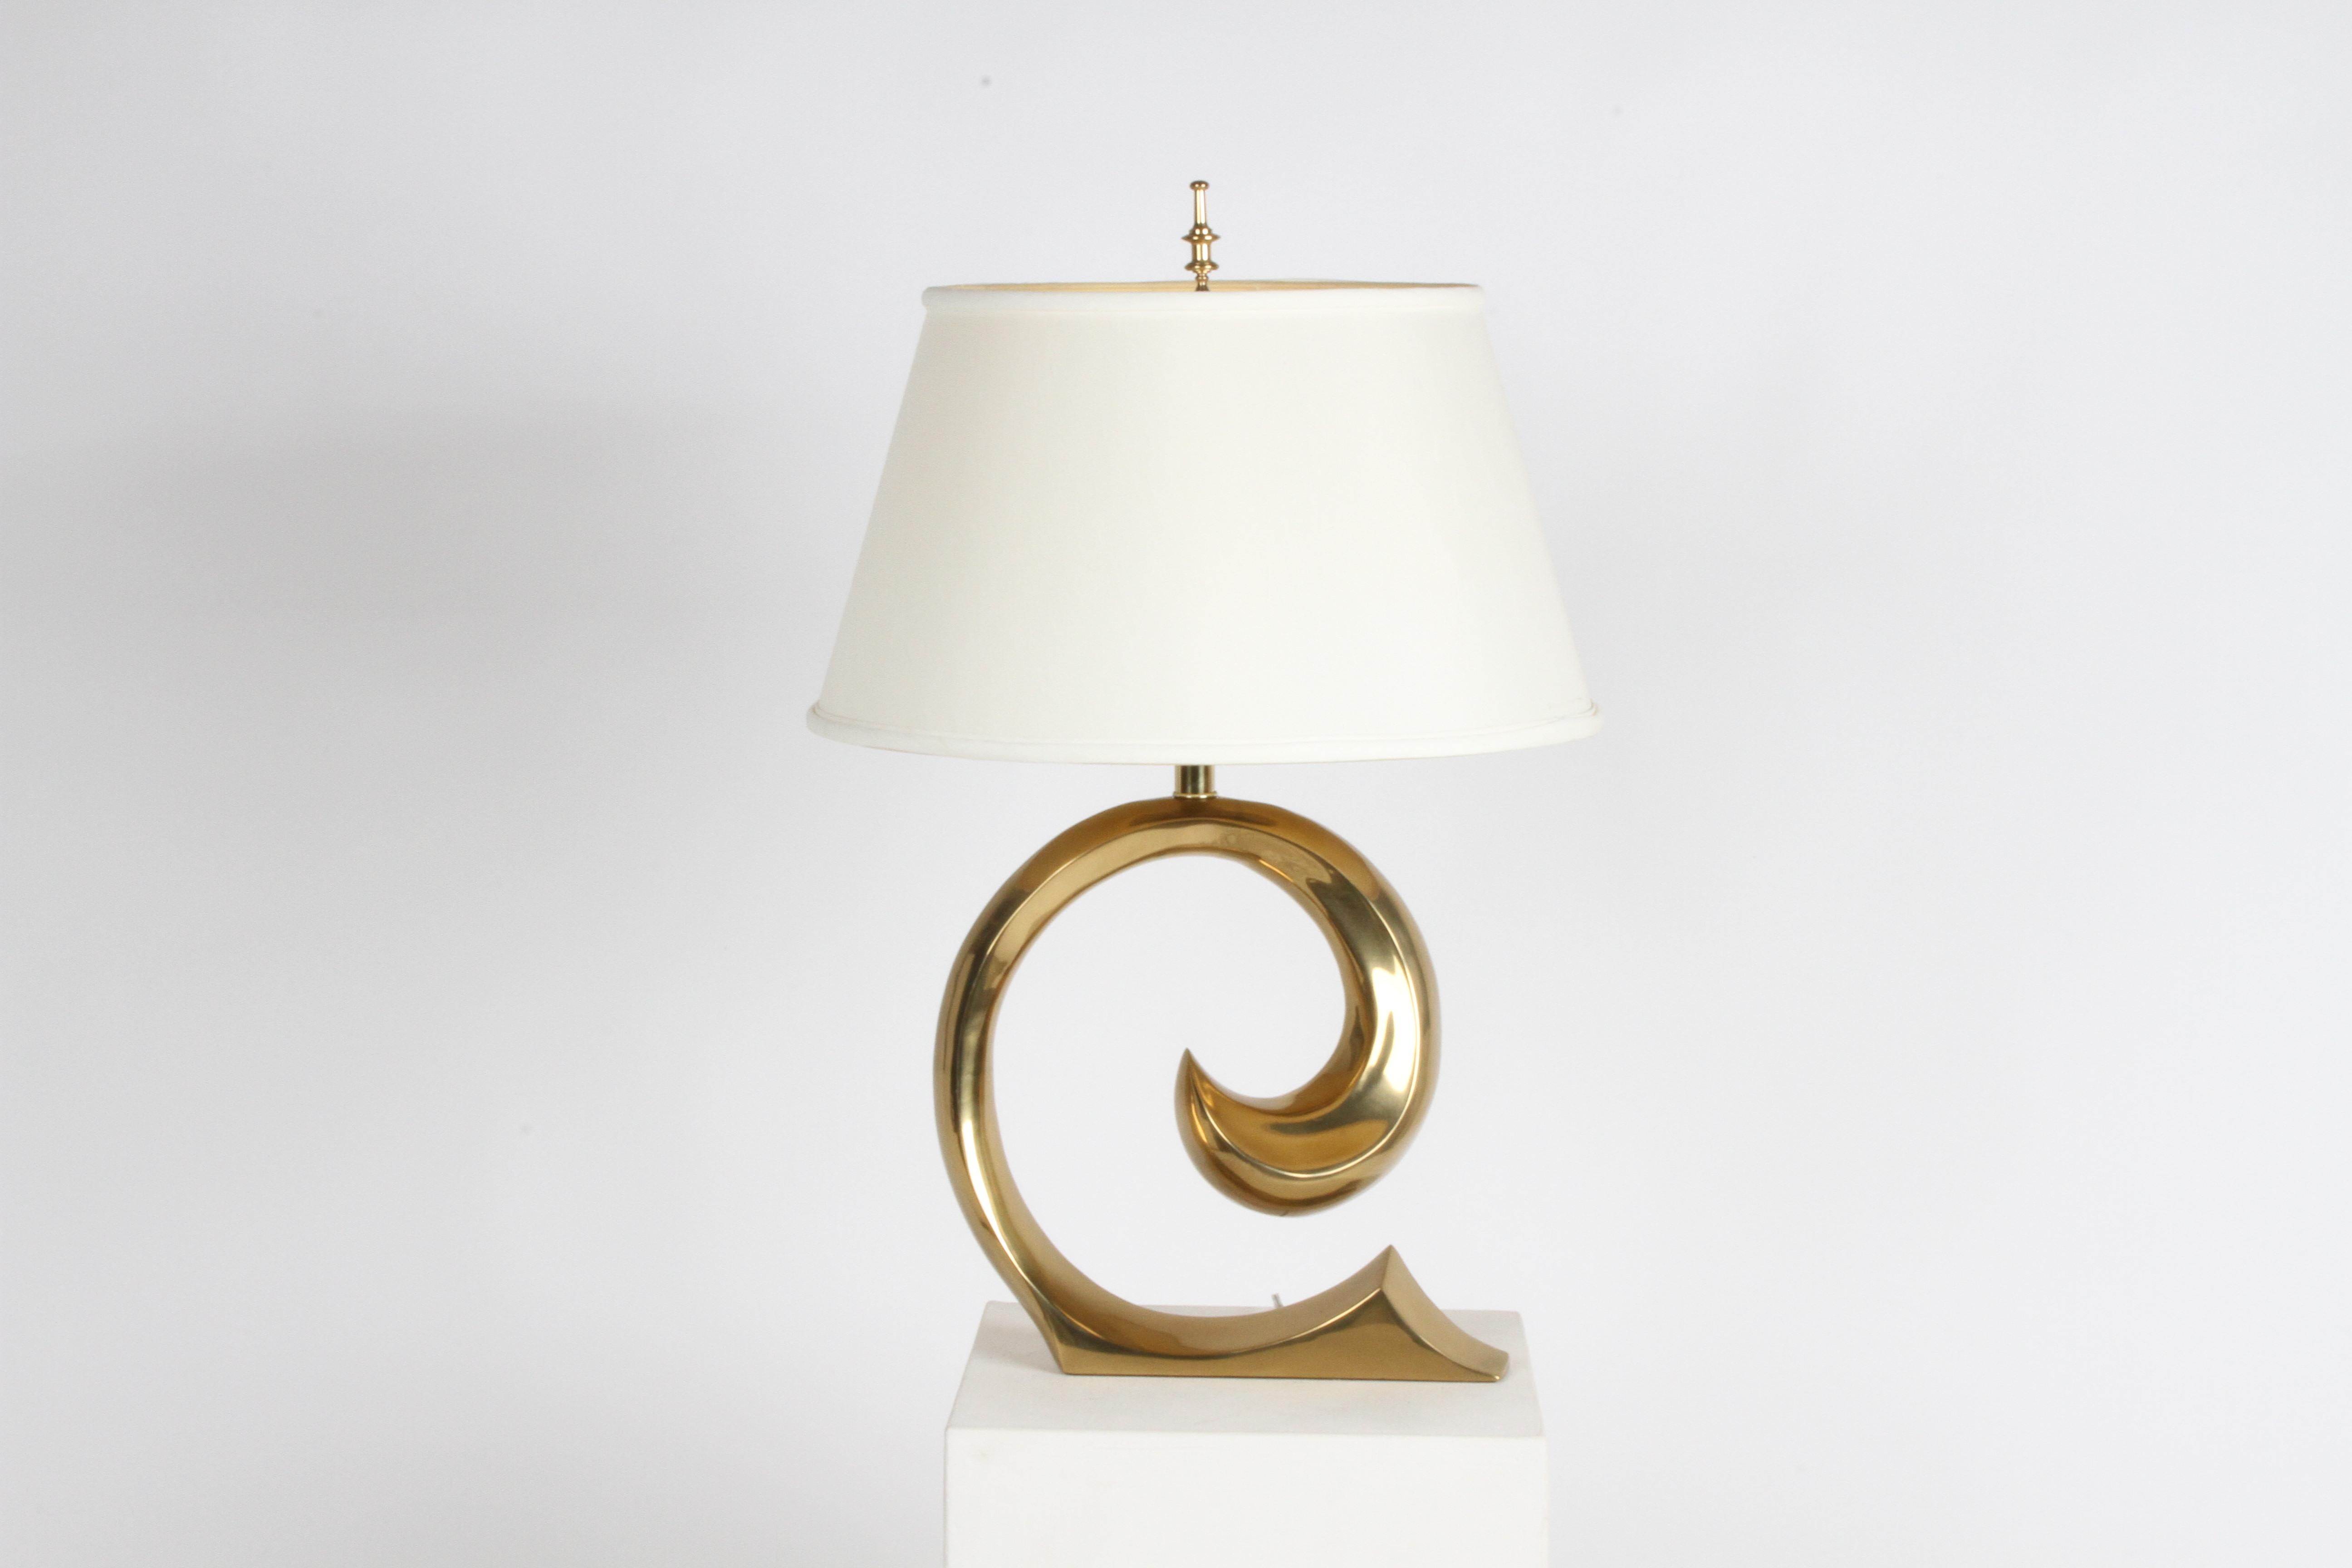 1970s style brass wave table lamp designed by Sante G. Alessandro for Erwin-Lambeth, but know as the Pierre Cardin lamp as it resembles the PC logo. Over all very nice condition & tested. Shade not included 
29